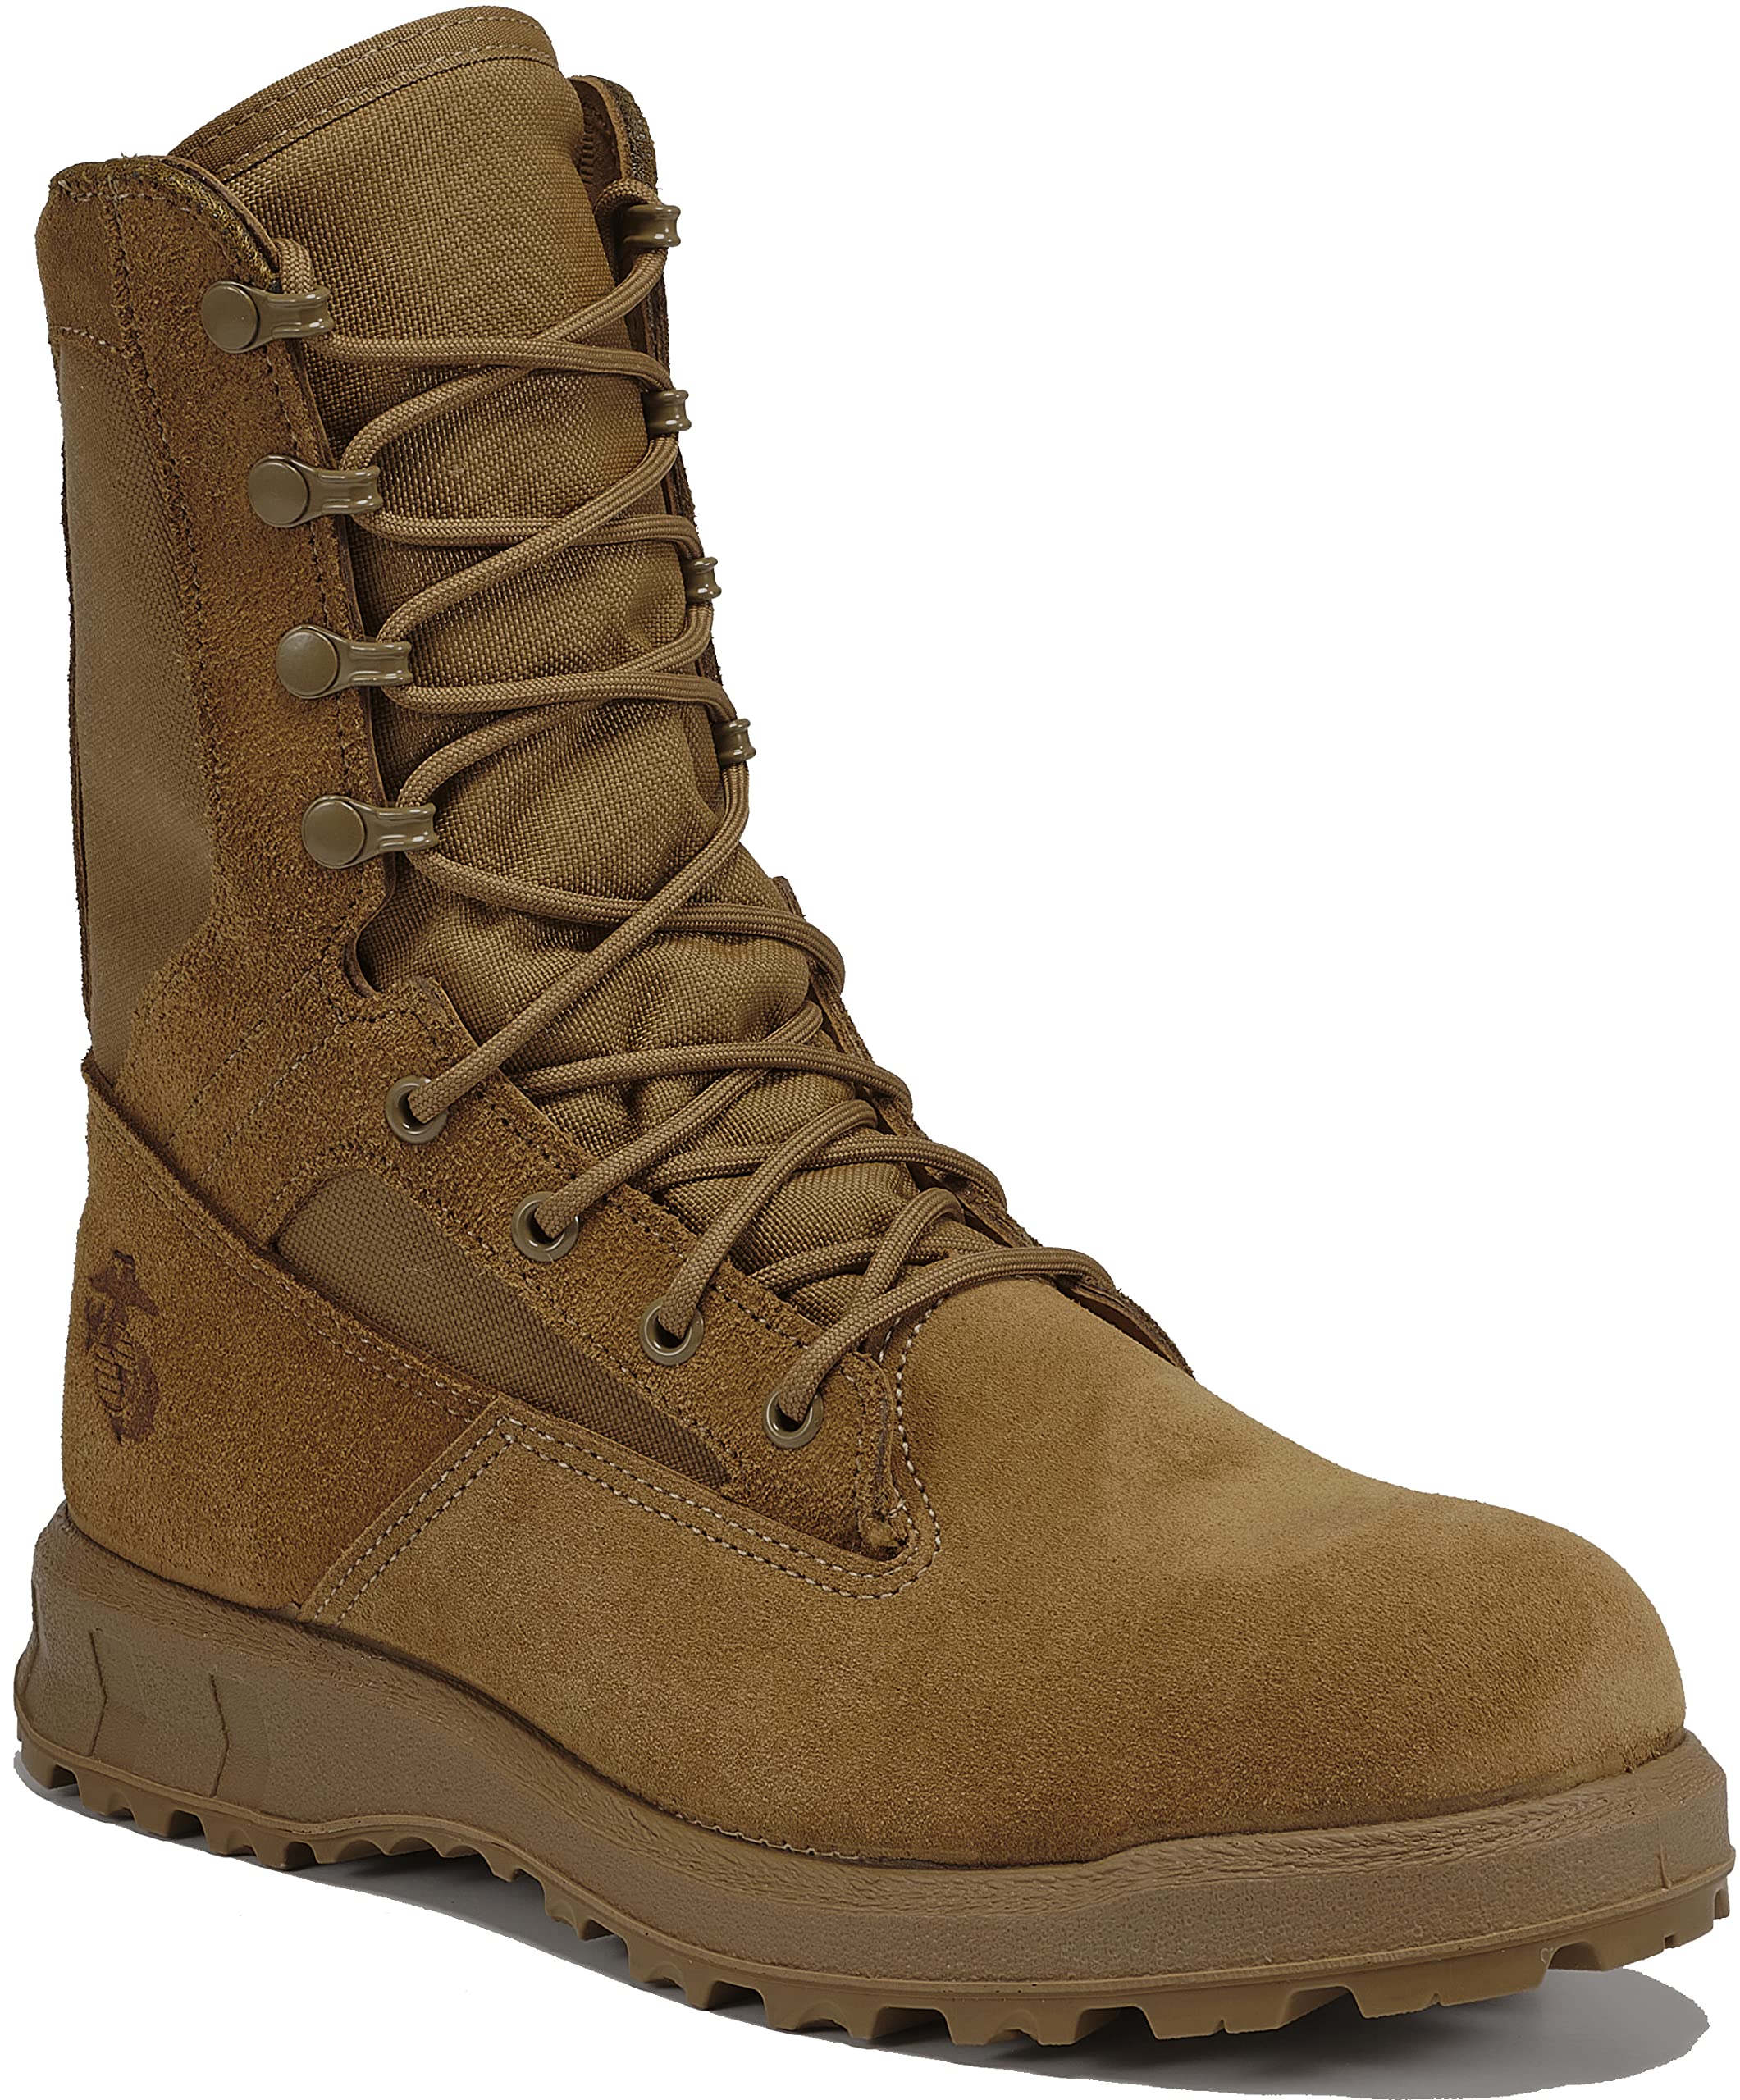 Belleville 510 MEF 8 Inch Ultralight Marine Corps Combat Boots for Men (EGA) - Certified USMC Coyote Brown Leather with High Traction Vibram Outsole, Berry Compliant